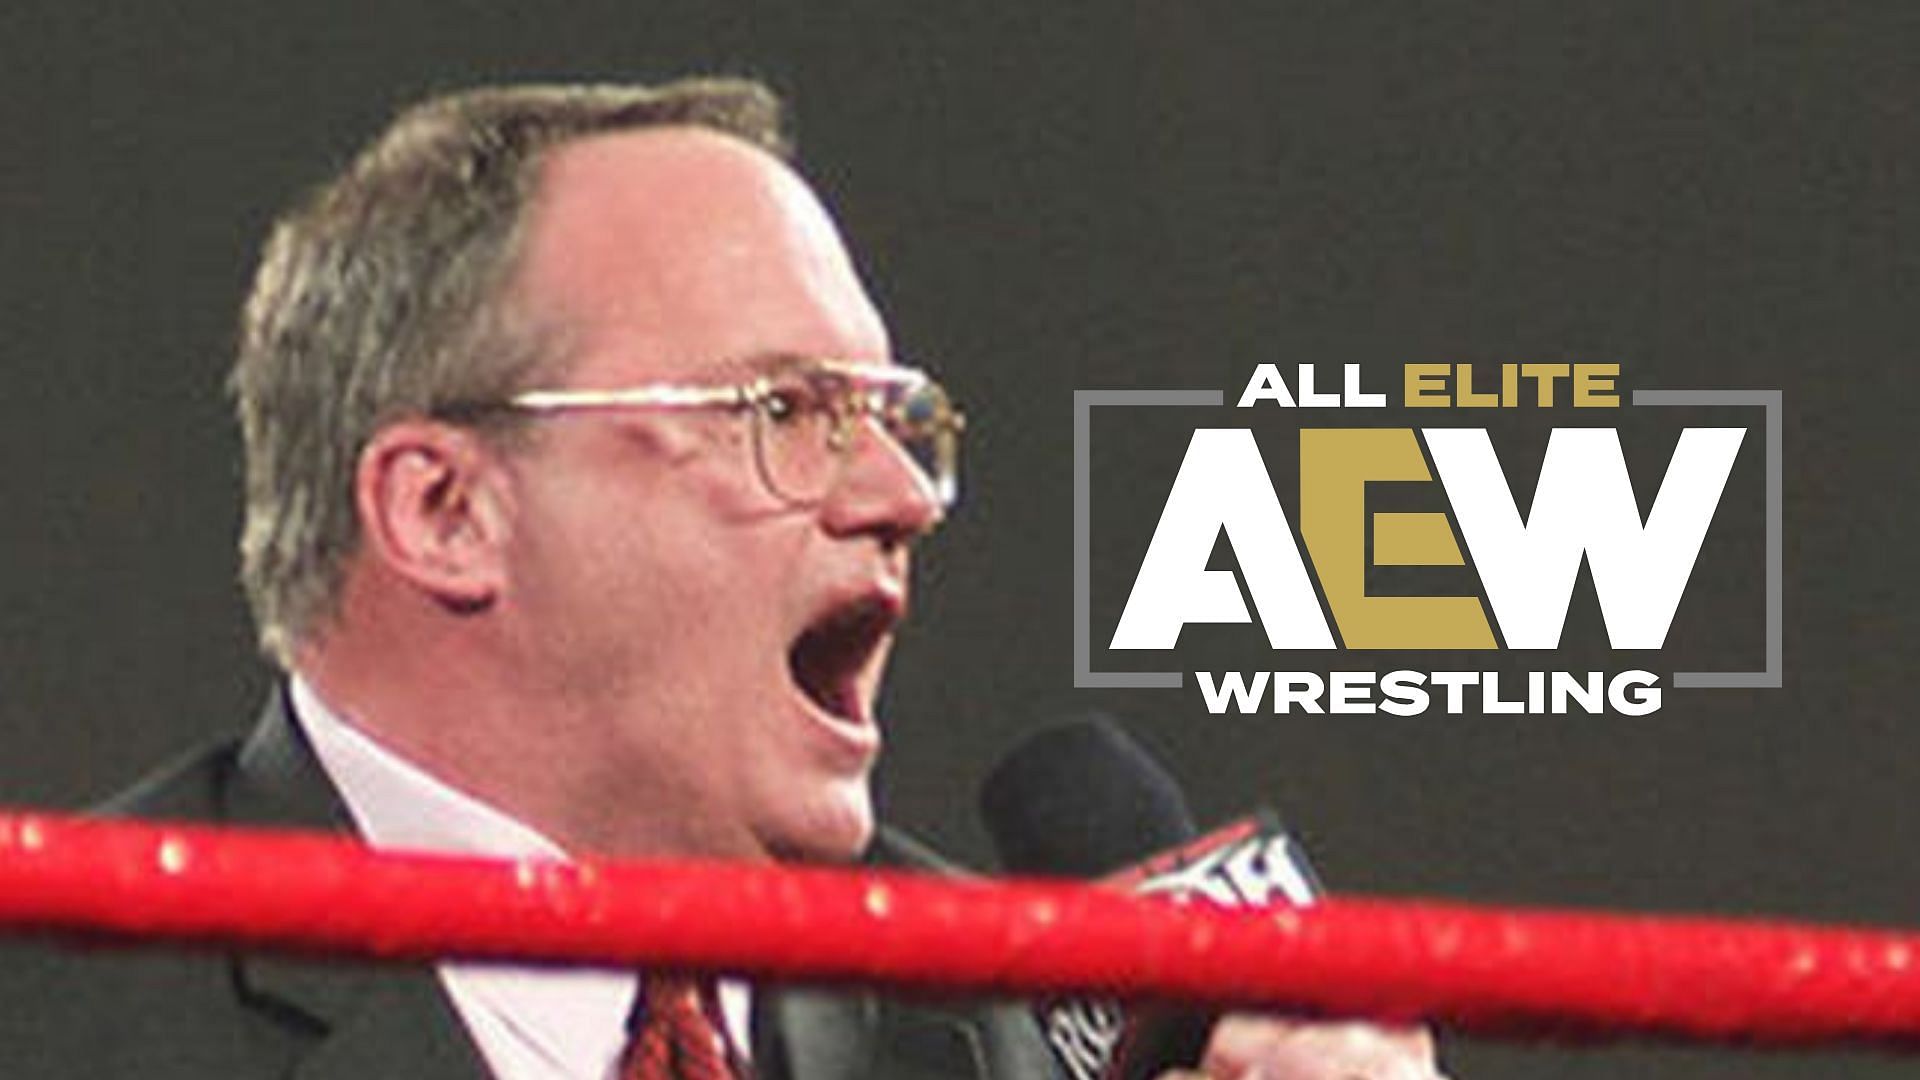 Jim Cornette is once again angry with AEW